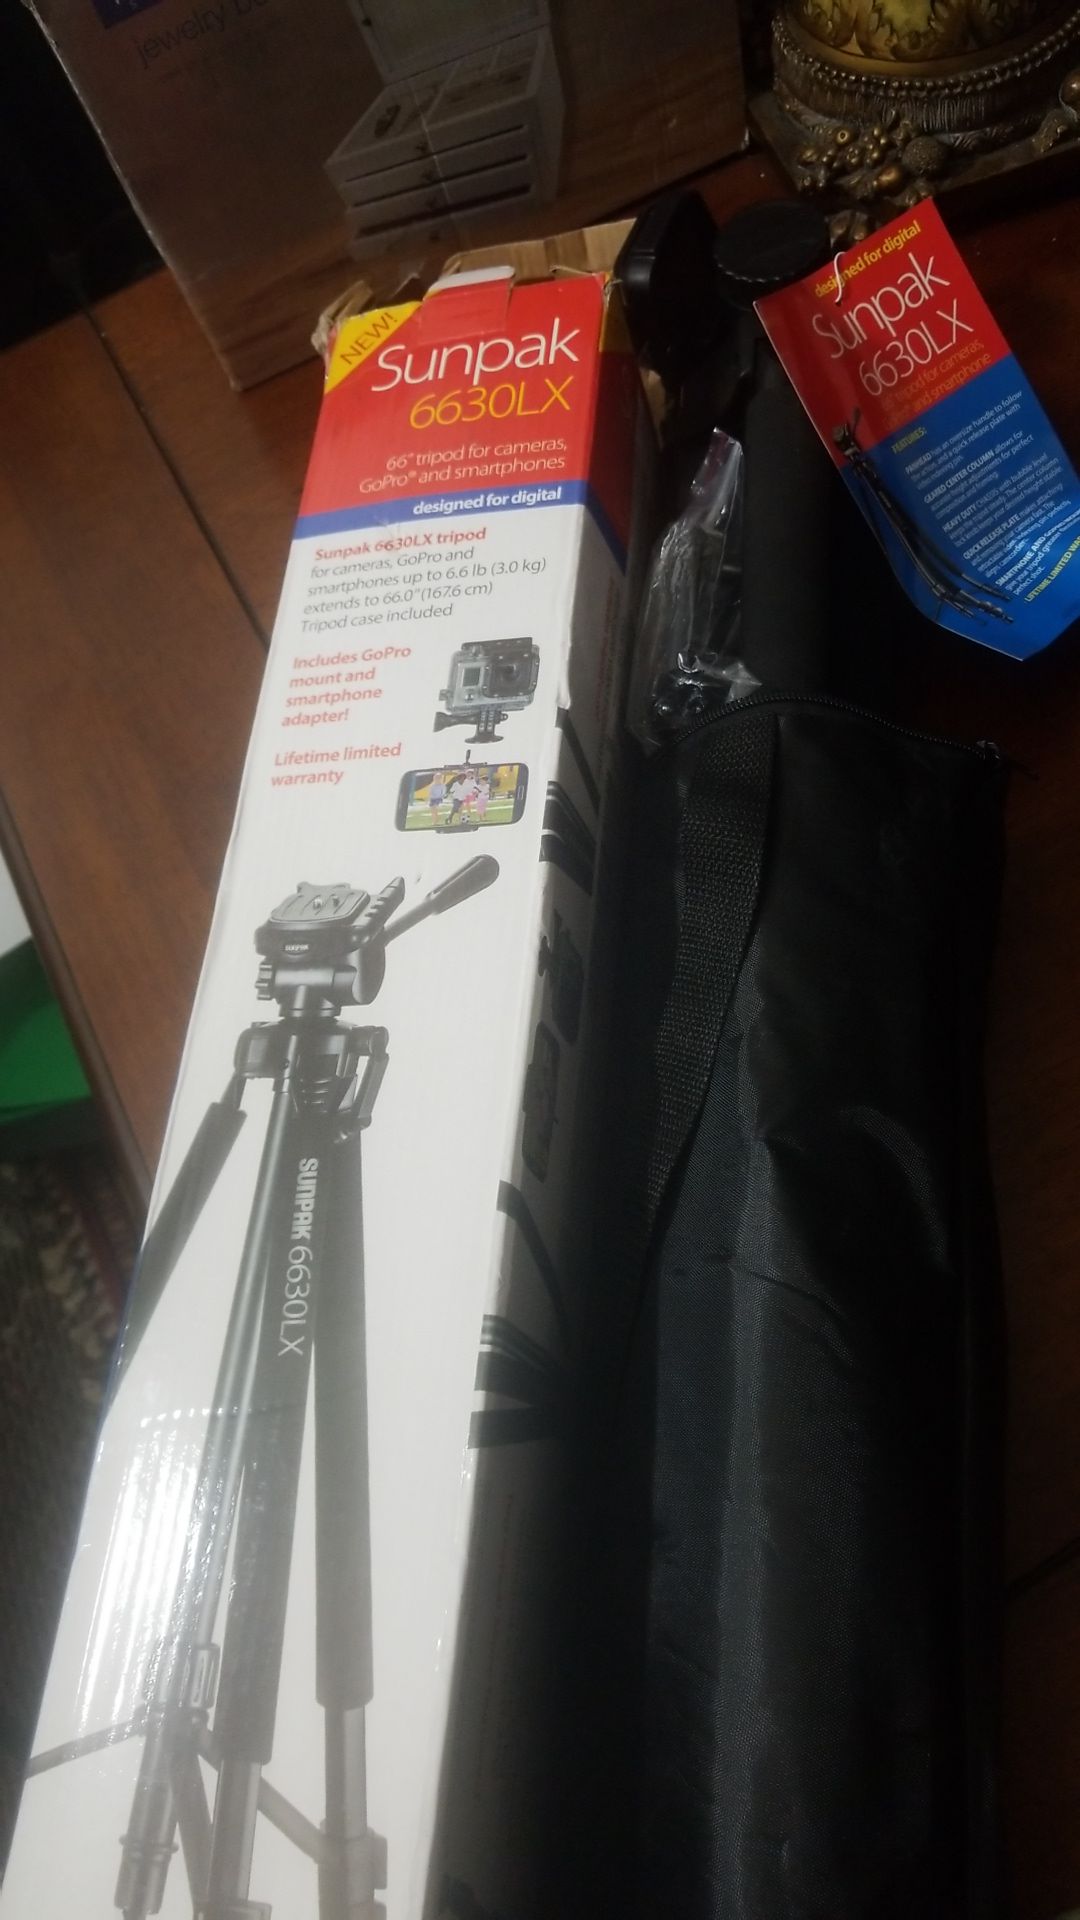 Brand new proffesional tripod for cameras , smart phones and gopro